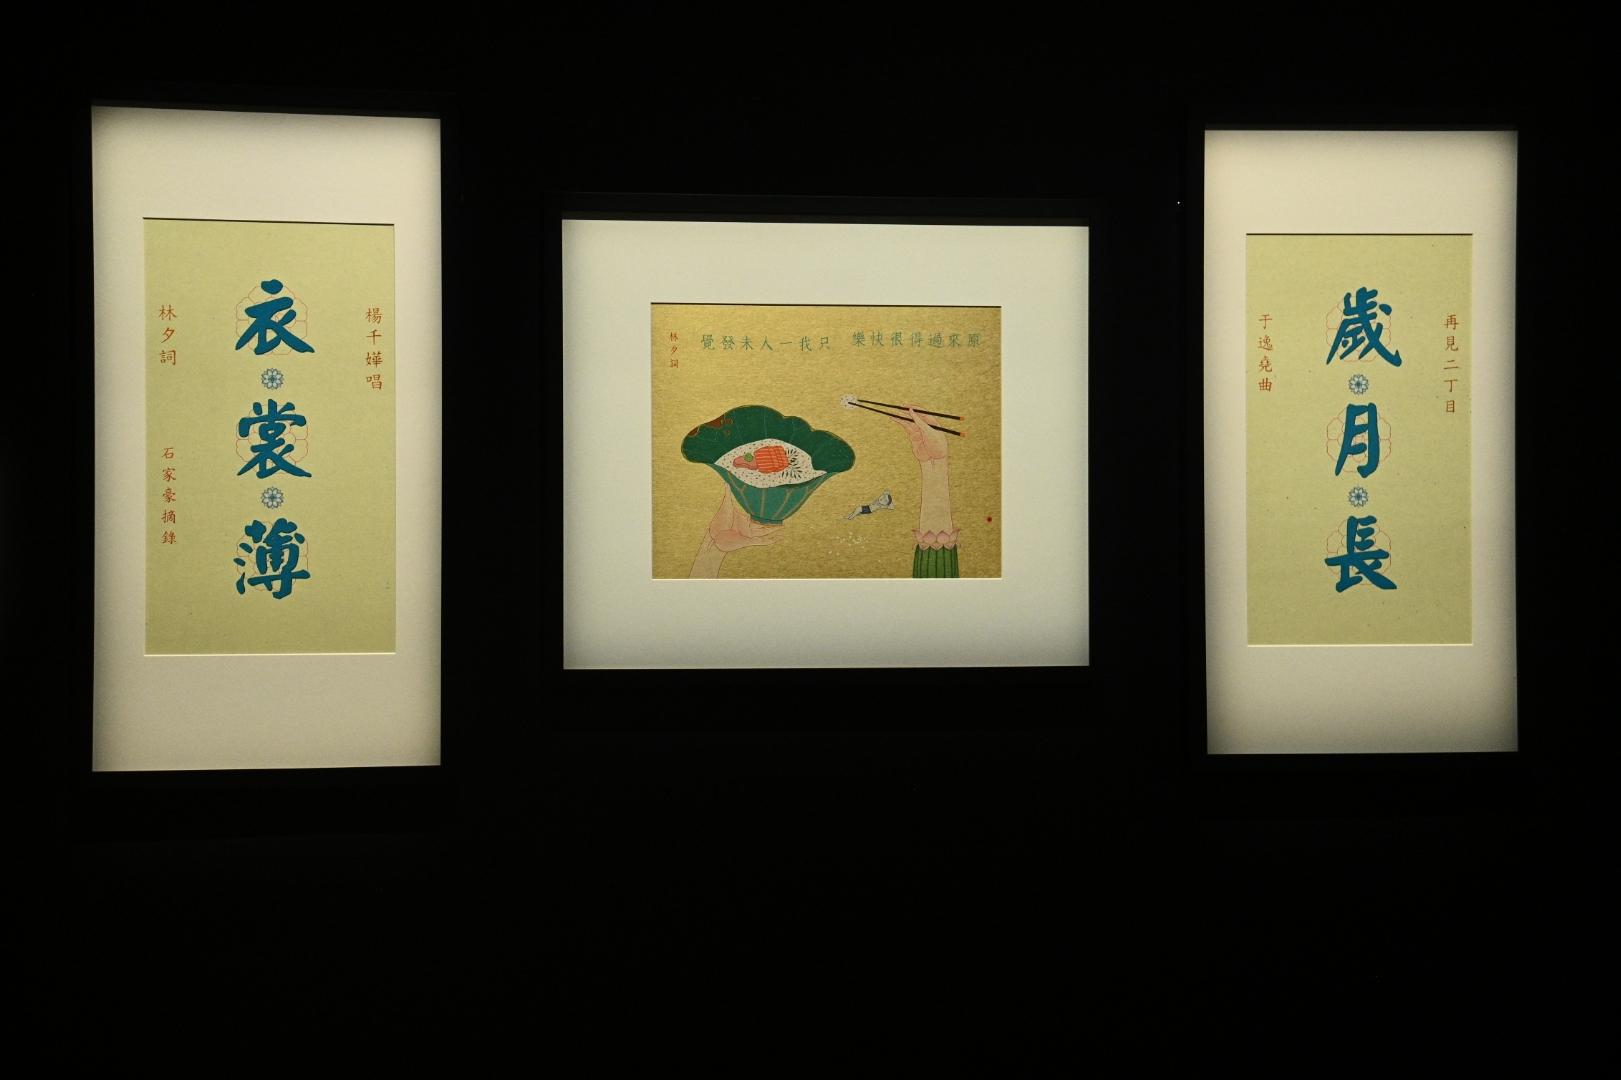 The "City Rhymes: The Melodious Notes of Calligraphy" exhibition will be held from tomorrow (July 22) at the Hong Kong Museum of Art. Photo shows Shieh Ka-ho's "Lyrics by Lin Xi".